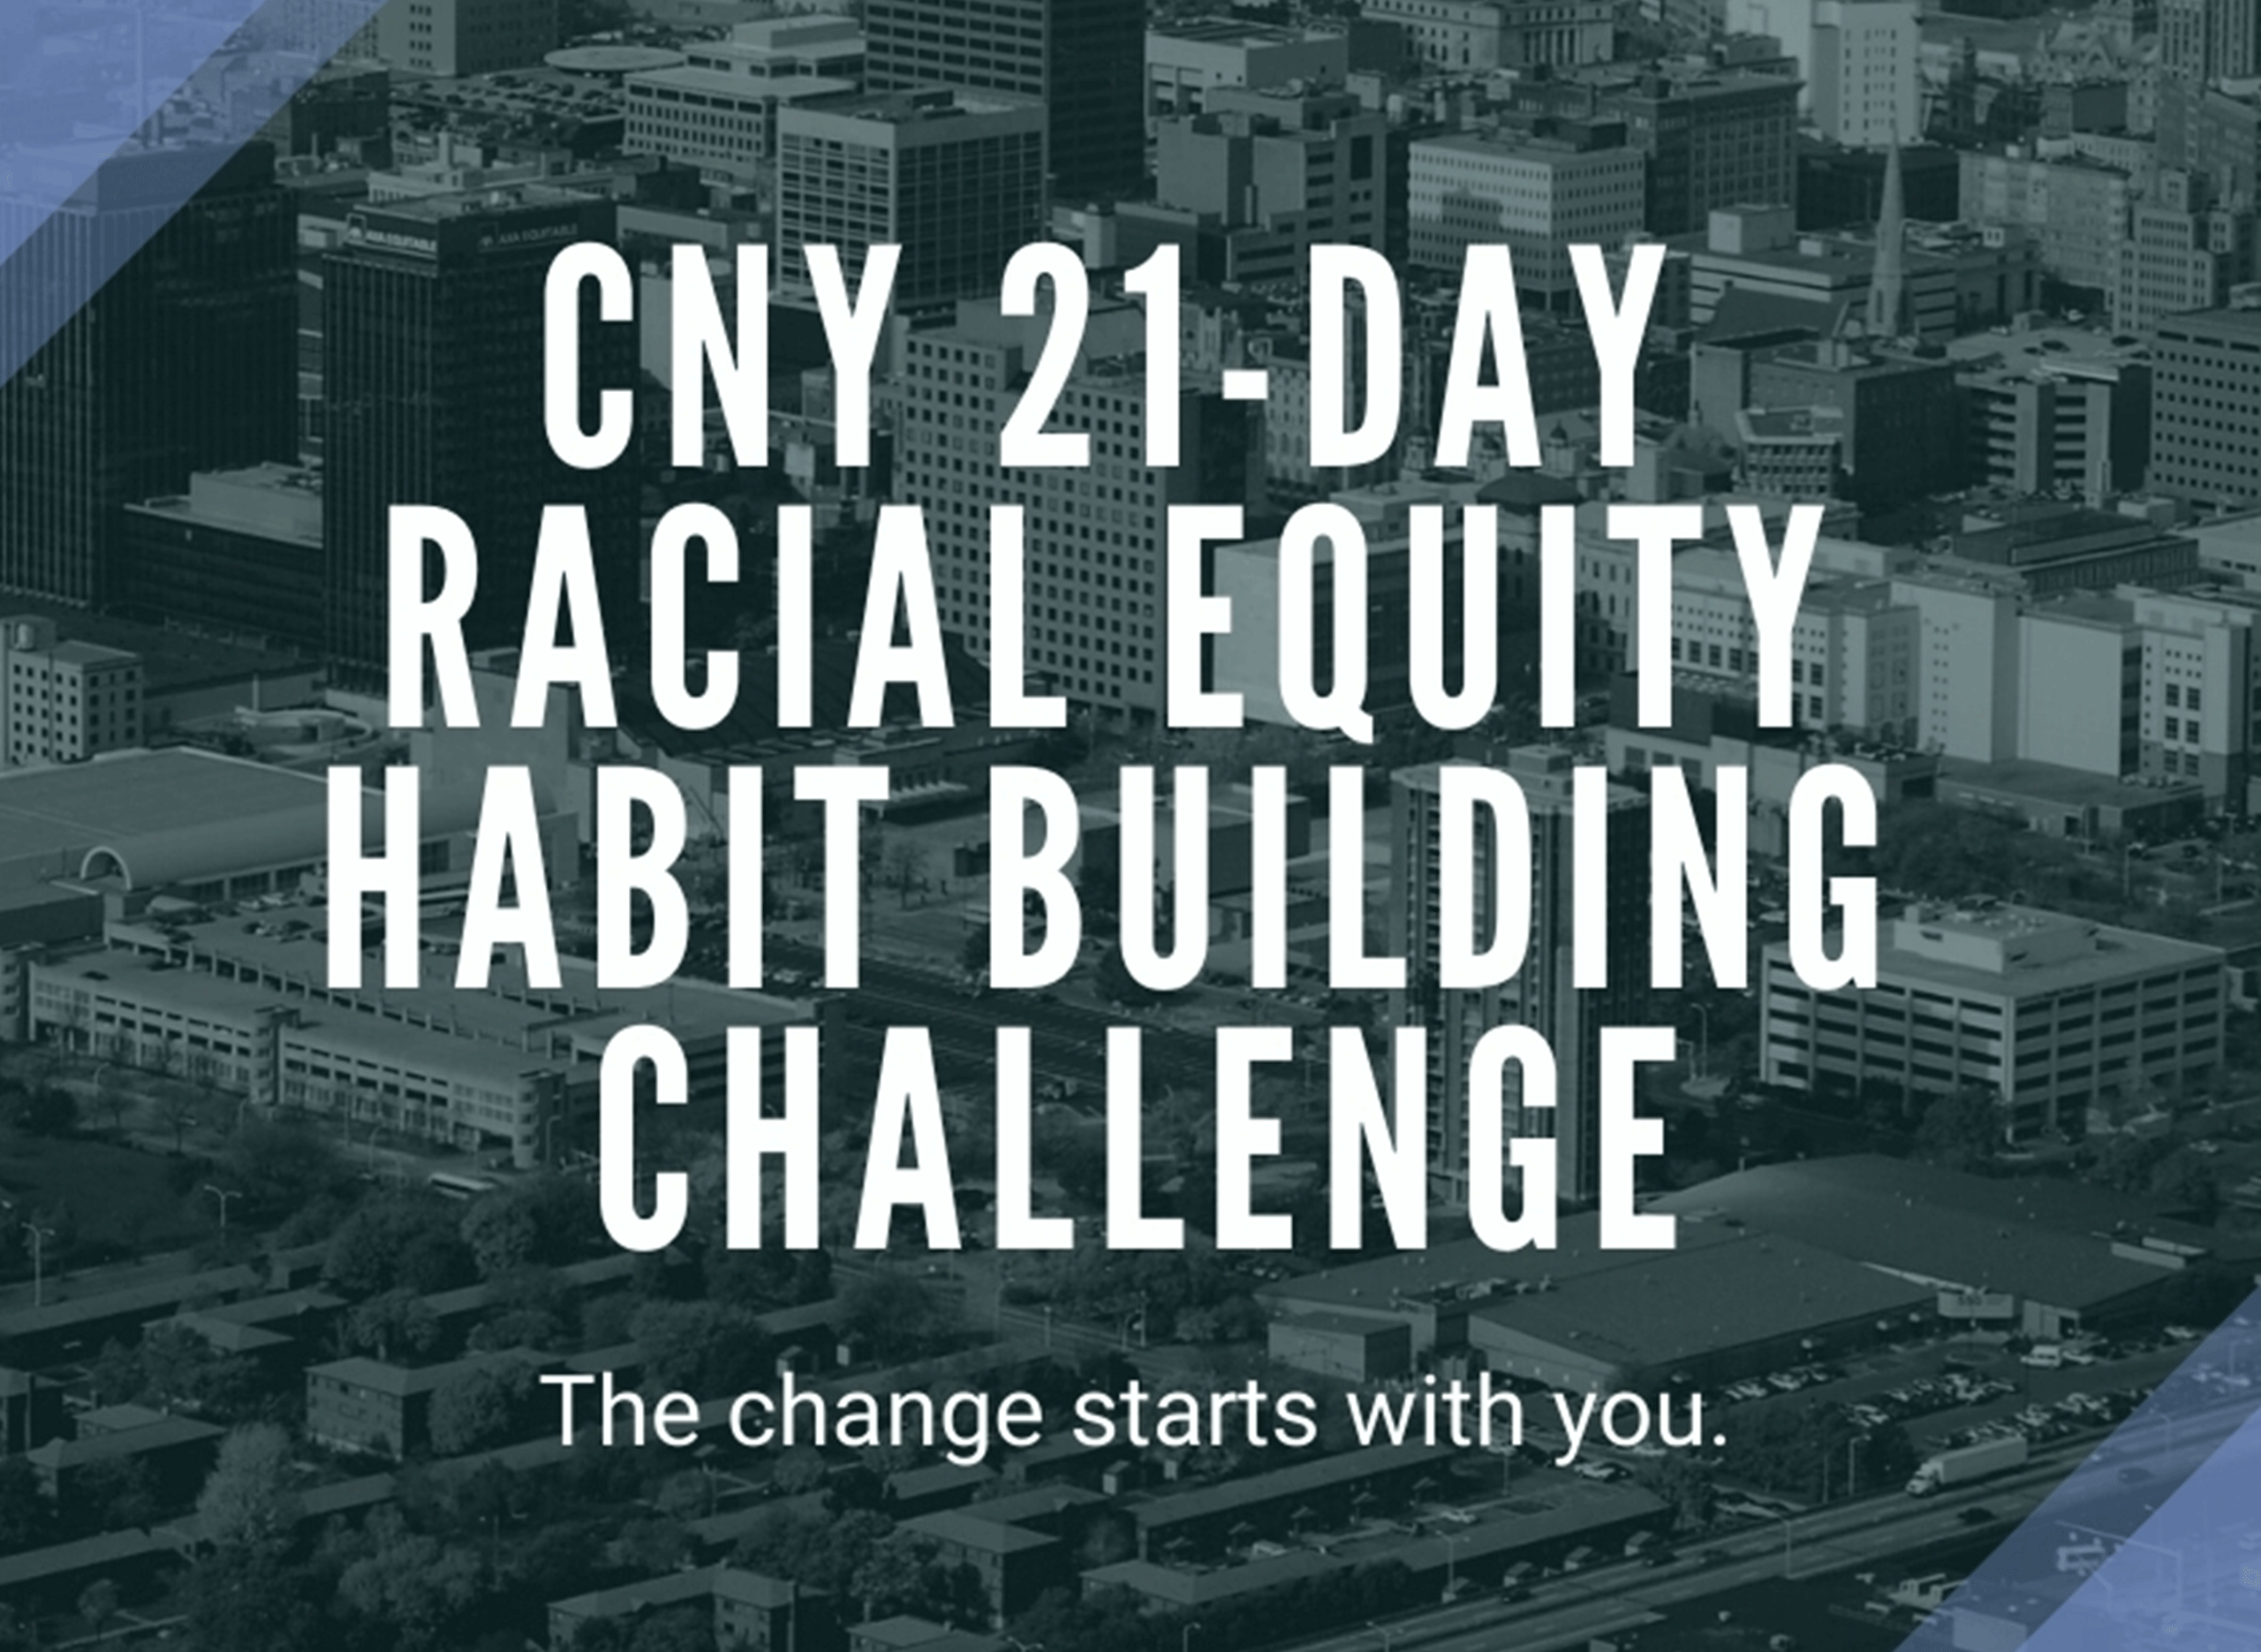 CNY 21-Day Racial Equity Habit Building Challenge. The change starts with you.